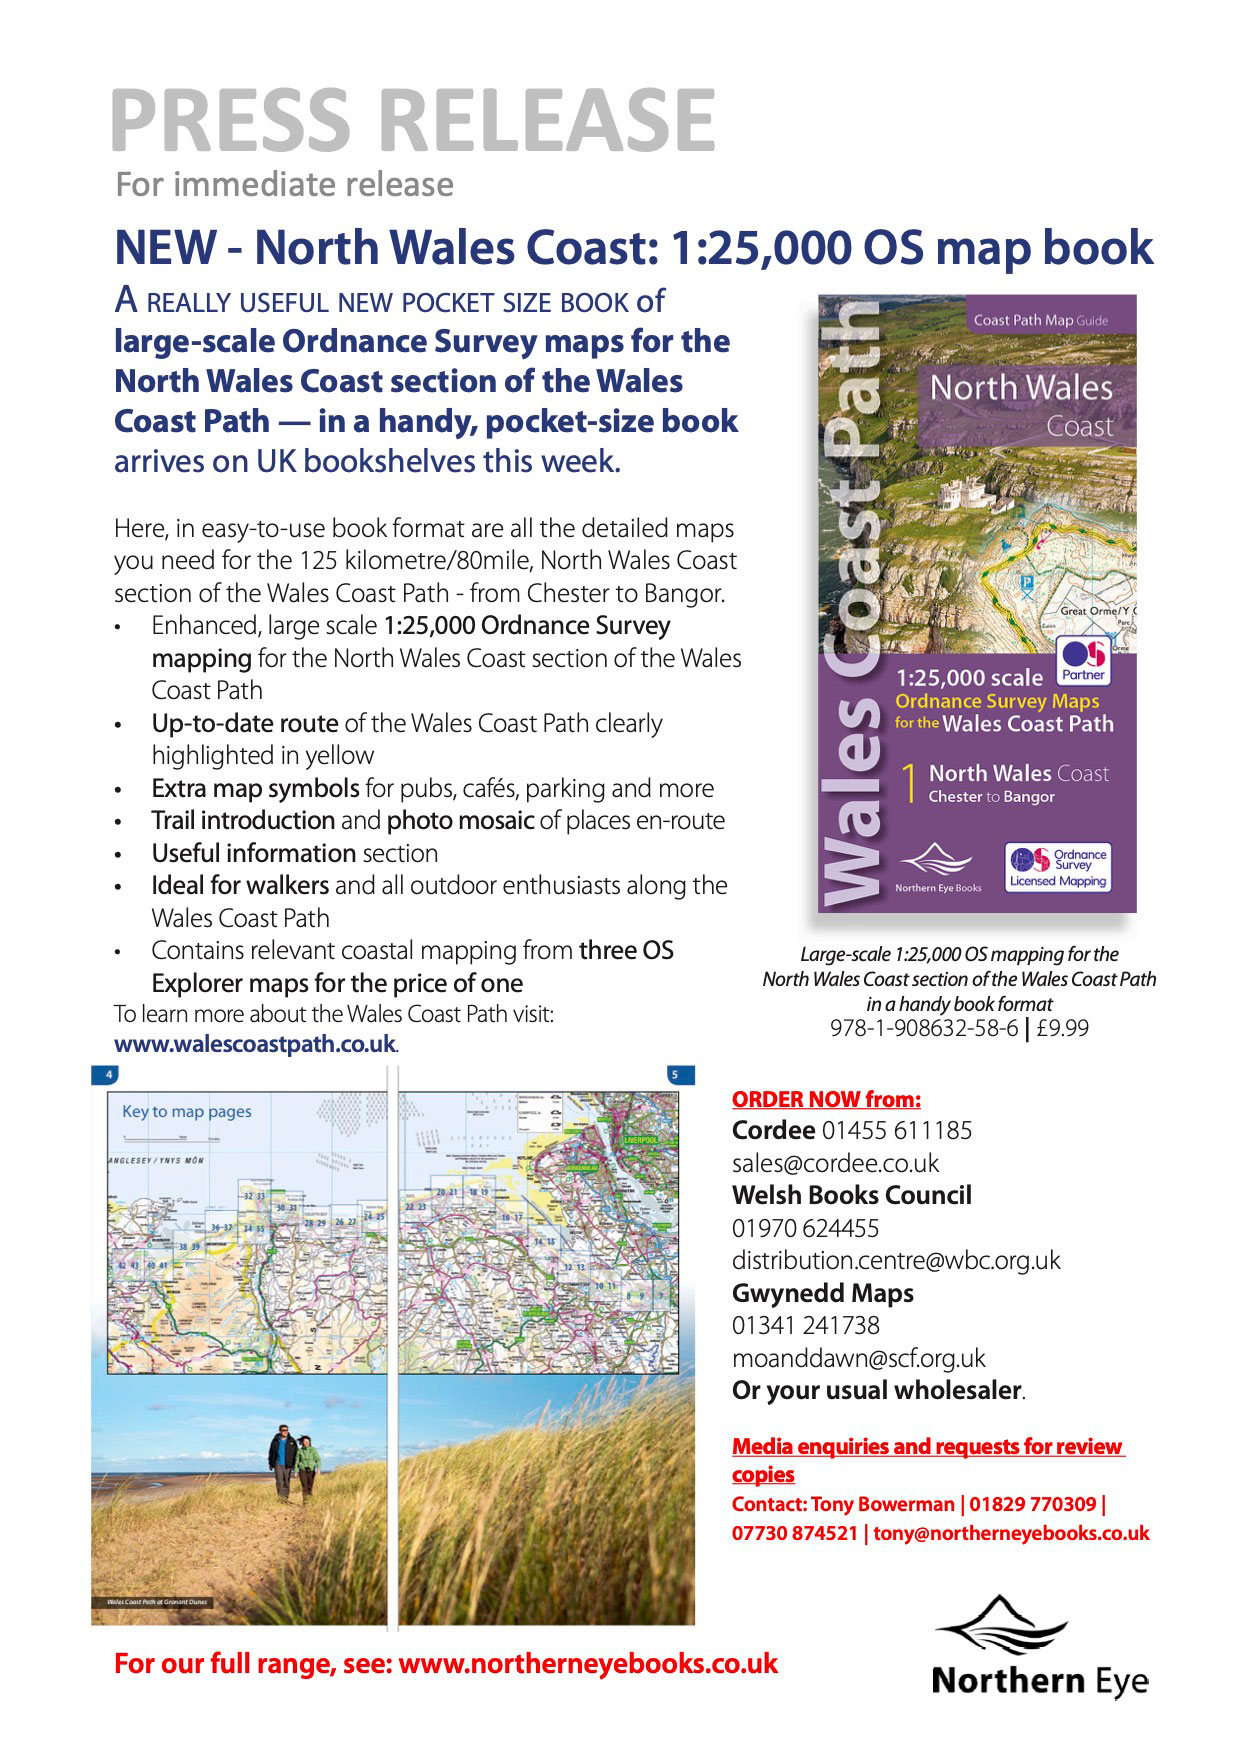 North Wales Coast large-scale Ordnance Survey OS mapping atlas - Chester to Bangor section of the Wales Coast Path